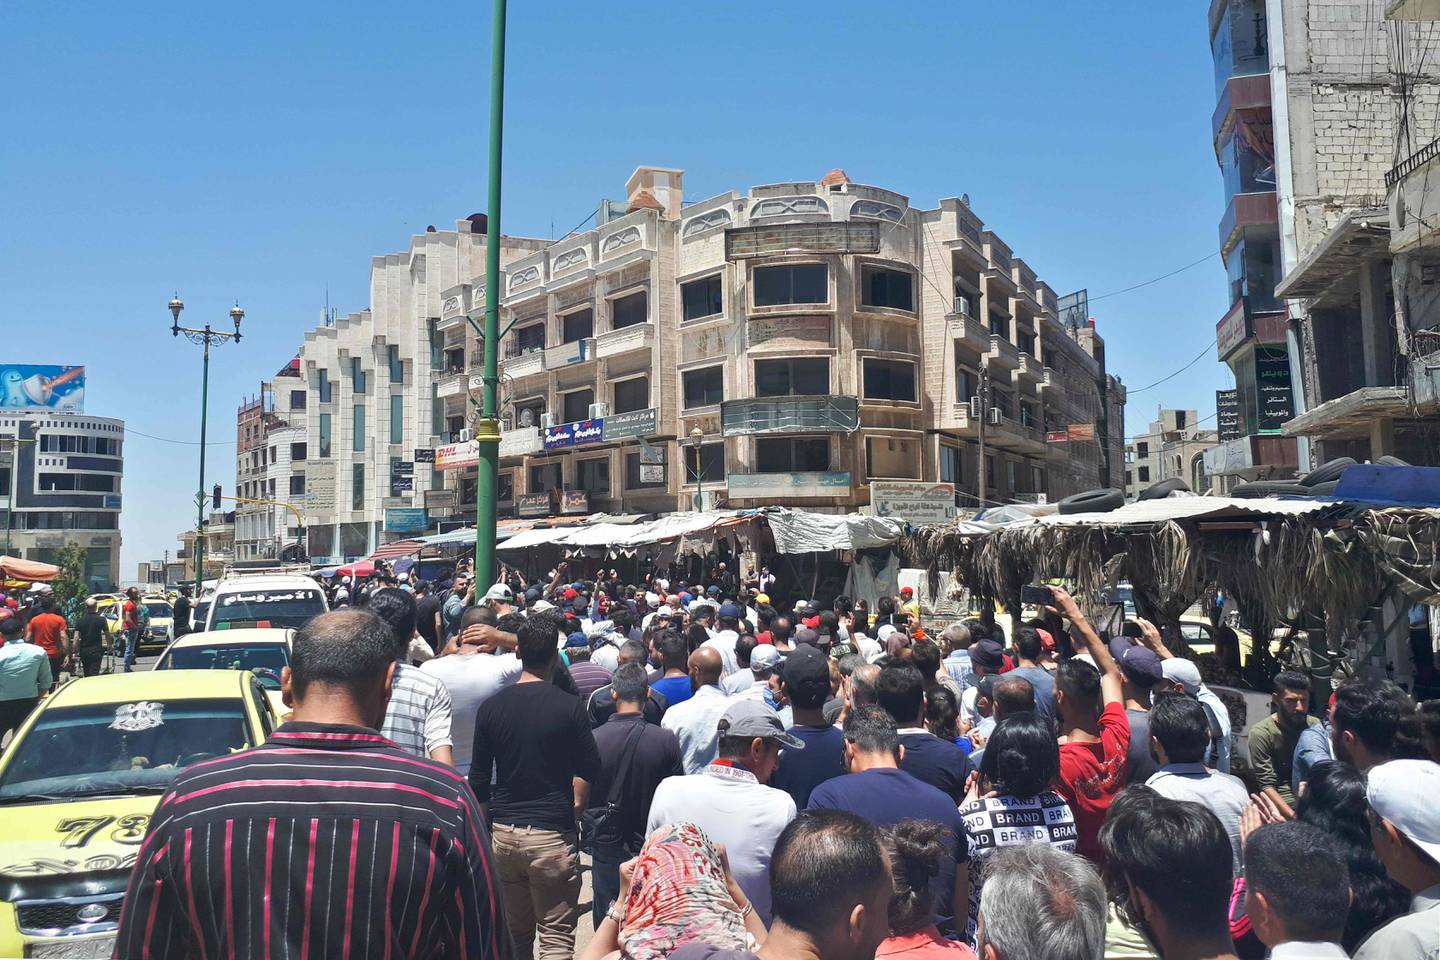 A handout picture released by the local news site Suwayda 24 shows Syrians chanting anti-government slogans as they protest the country's deteriorating economic conditions and corruption, in the southern city of Suwaida on June 9, 2020.  - == RESTRICTED TO EDITORIAL USE - MANDATORY CREDIT "AFP PHOTO / HO / SUWAIDA24" - NO MARKETING NO ADVERTISING CAMPAIGNS - DISTRIBUTED AS A SERVICE TO CLIENTS ==
 / AFP / SUWAYDA24 / - / == RESTRICTED TO EDITORIAL USE - MANDATORY CREDIT "AFP PHOTO / HO / SUWAIDA24" - NO MARKETING NO ADVERTISING CAMPAIGNS - DISTRIBUTED AS A SERVICE TO CLIENTS ==
